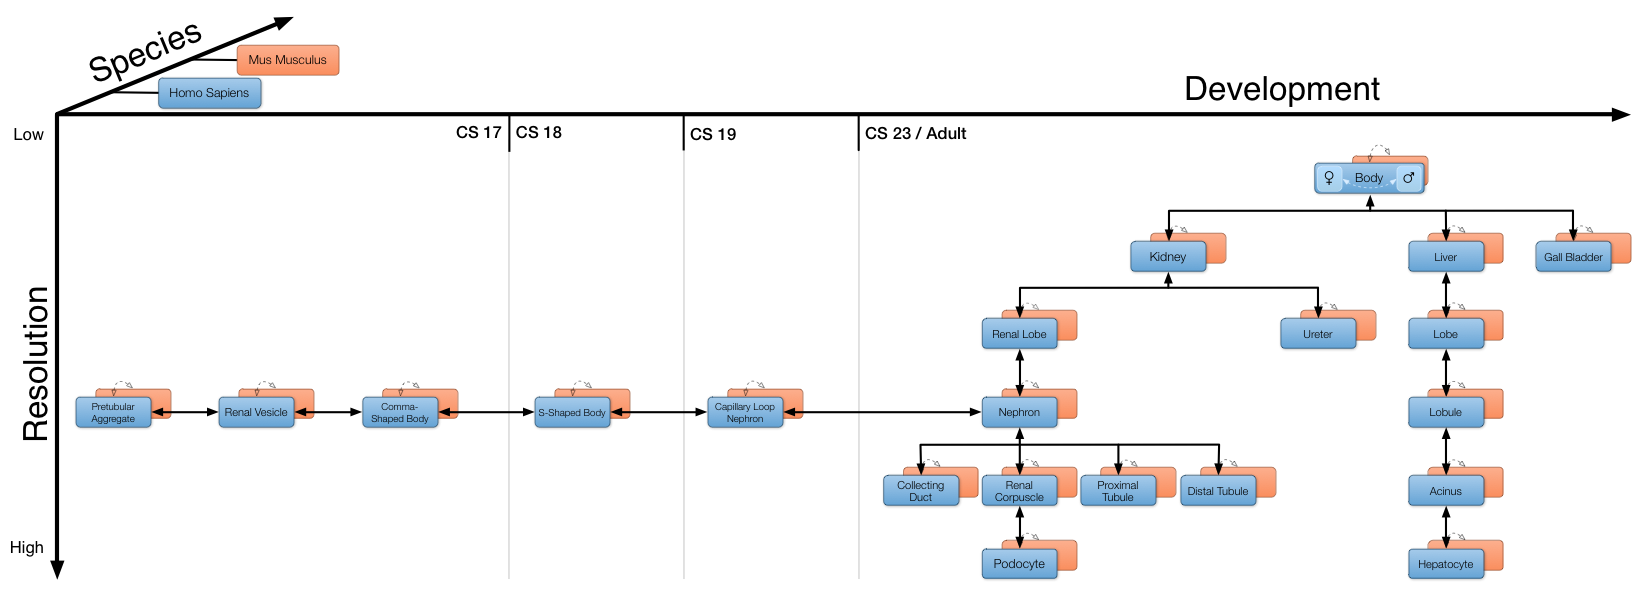 Fig. 2: Current browse tree of the Semantic Body Browser.